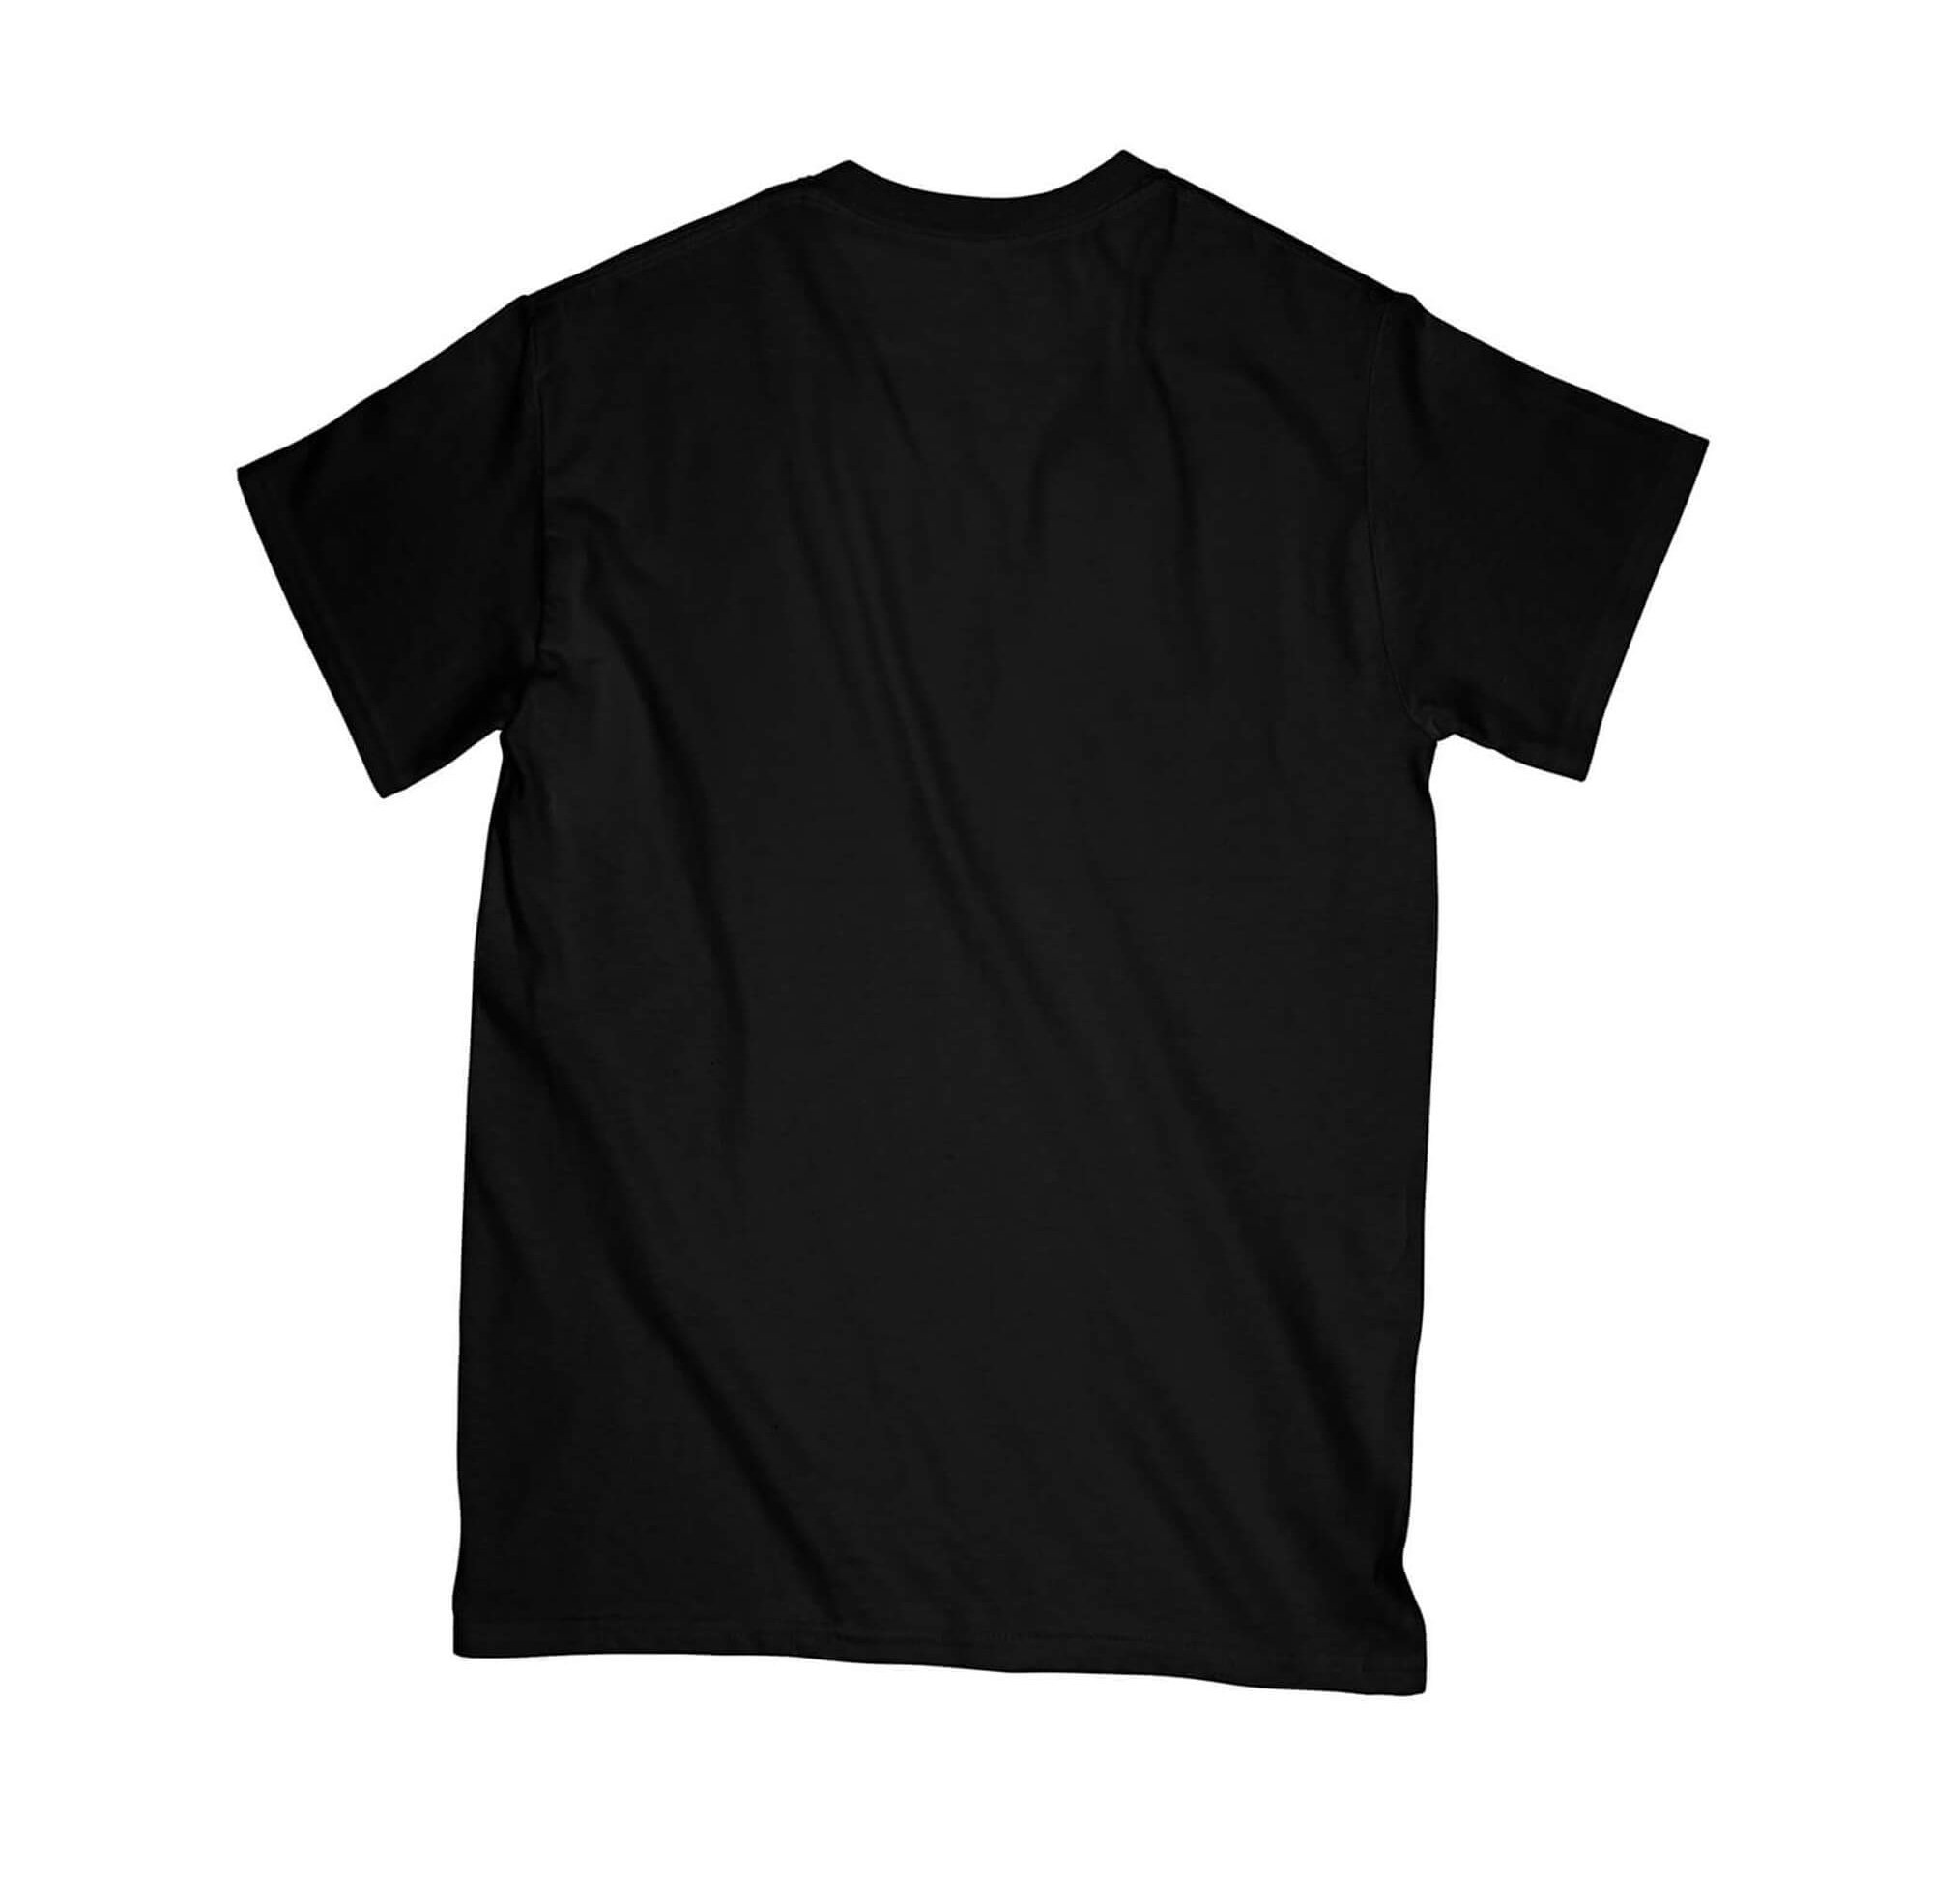 BTR – Built To Ride Co.  Classic Unisex Tee in Black